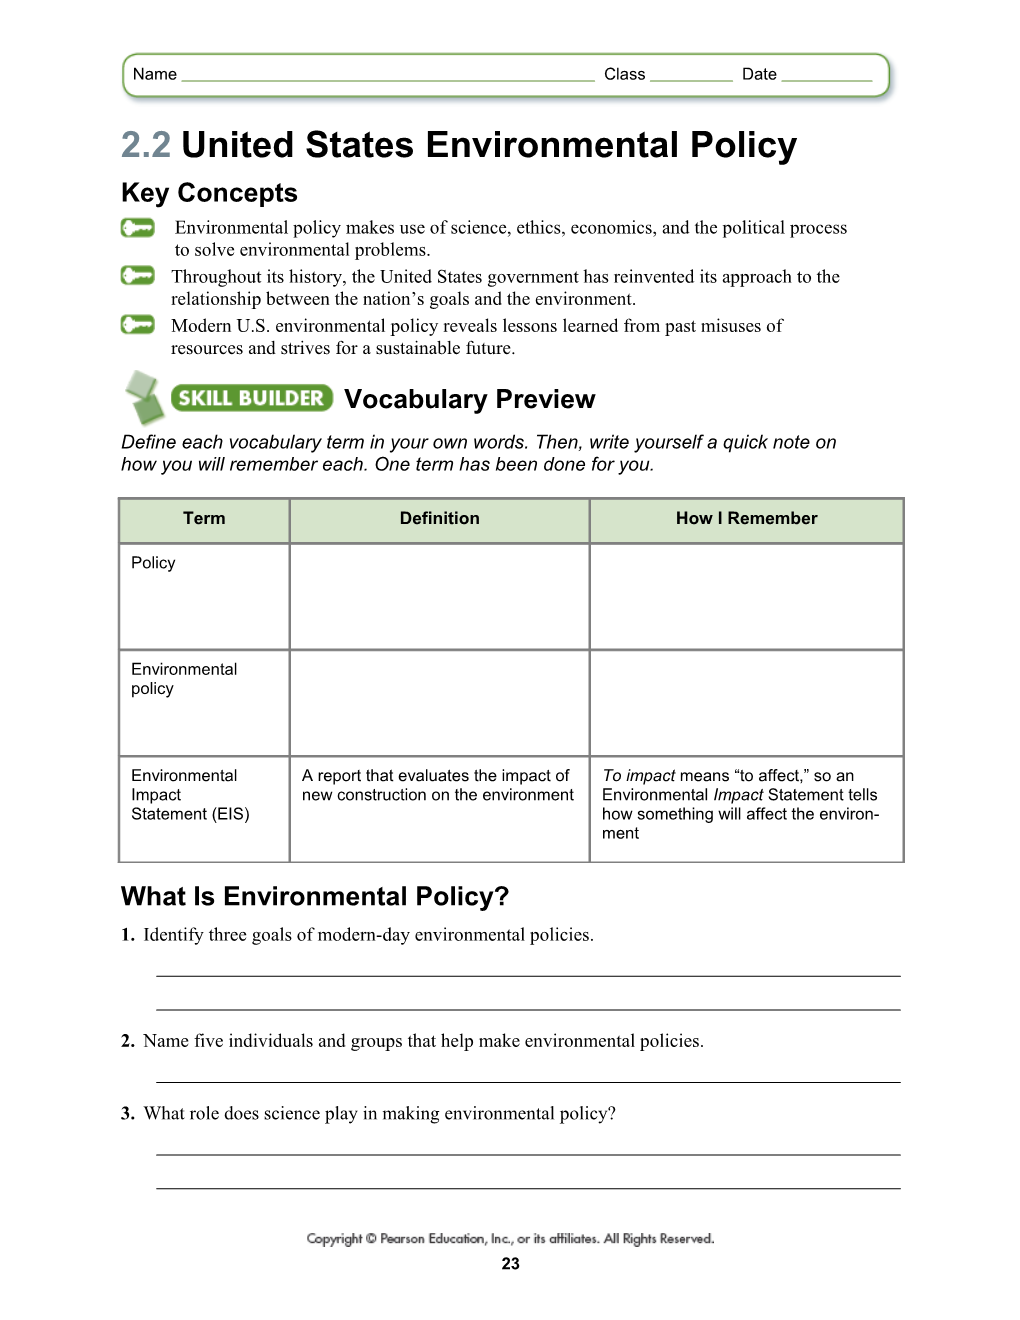 2.2United States Environmental Policy